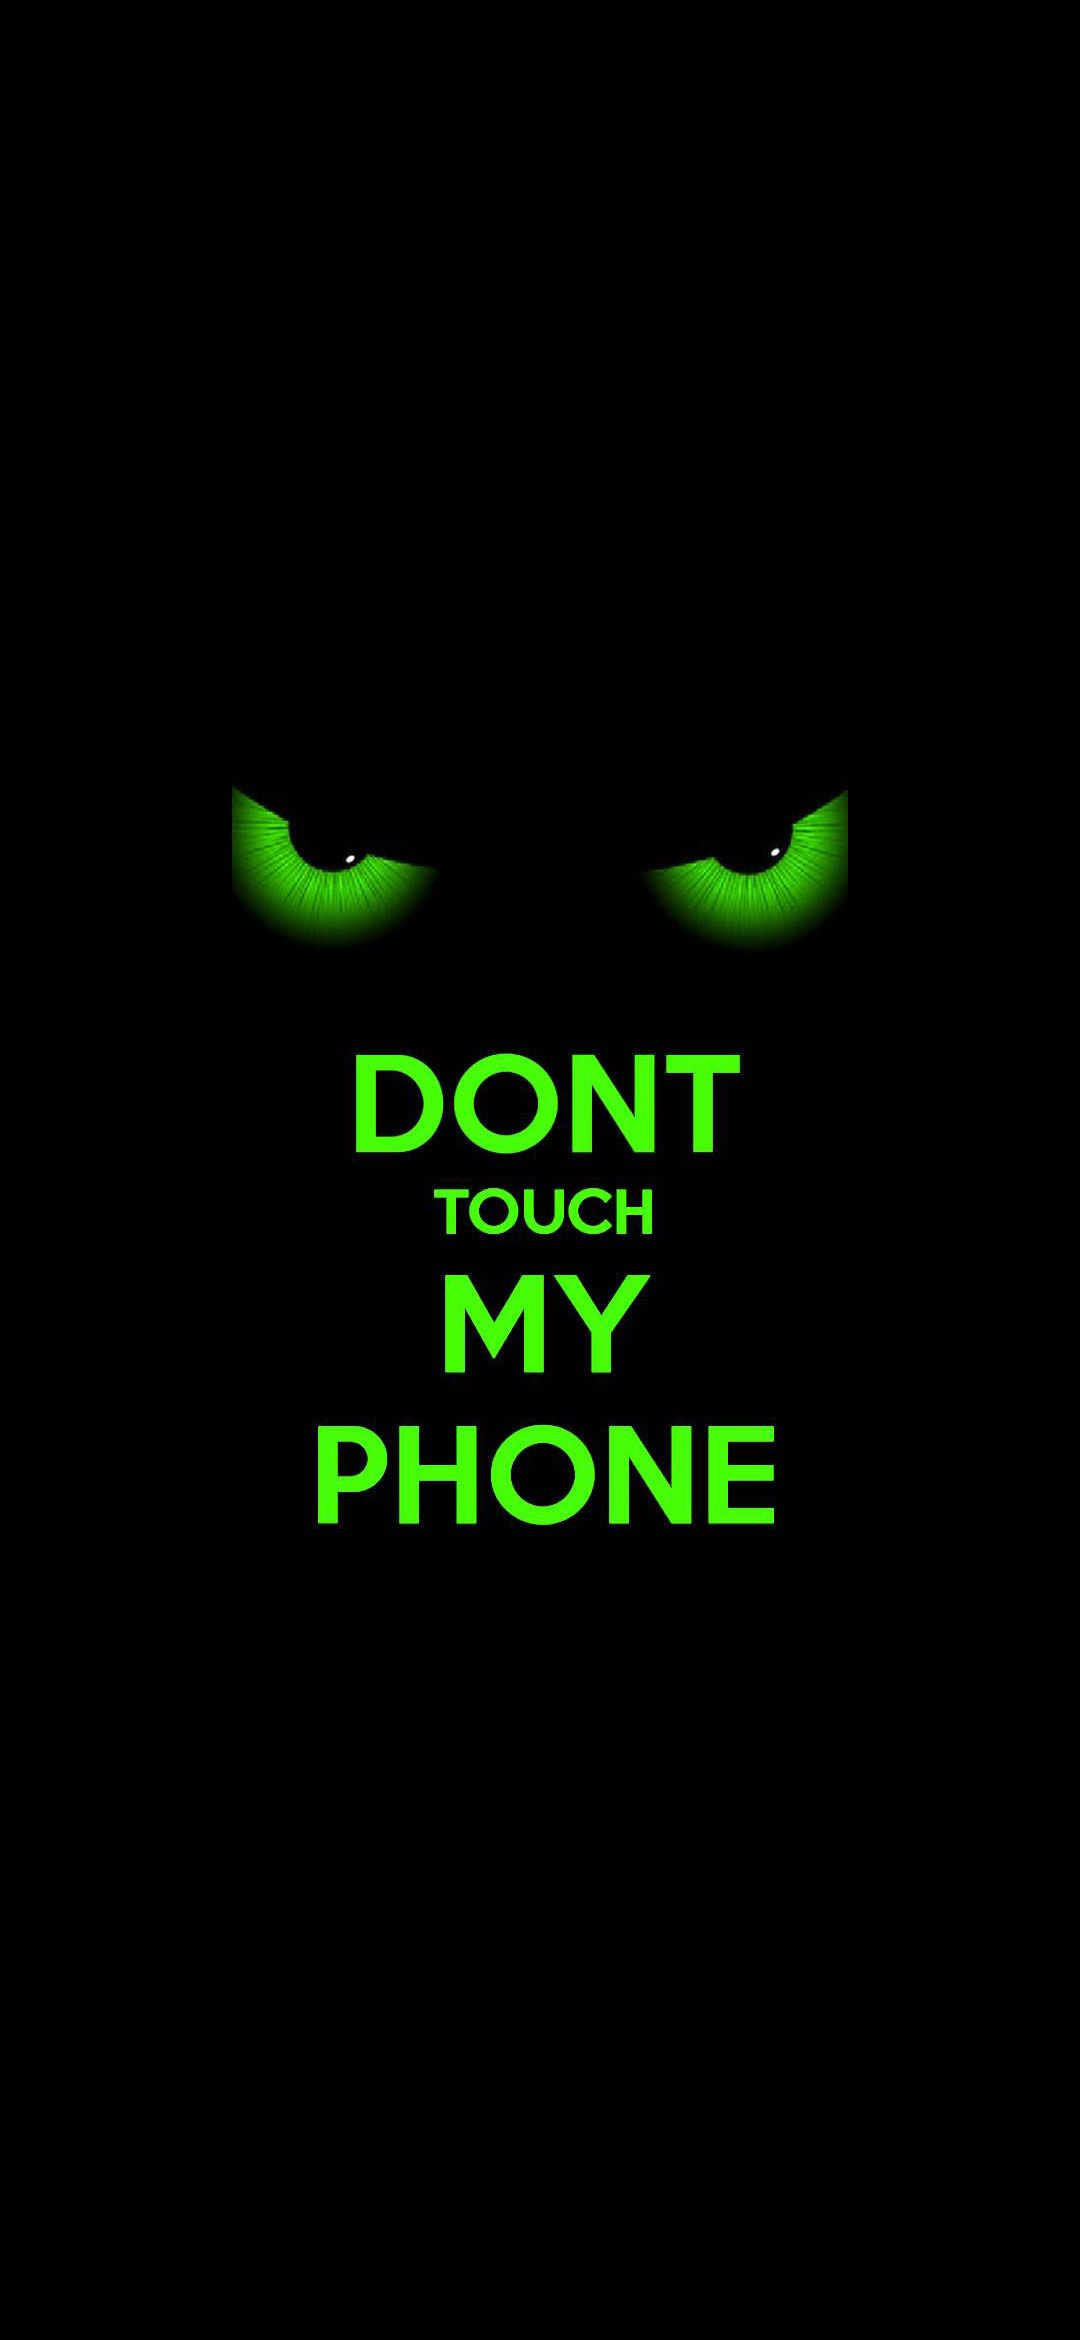 Dont Touch Scary Lock Screen Wallpaper. Lock screen wallpaper hd, Lock screen wallpaper android, Lock screen wallpaper